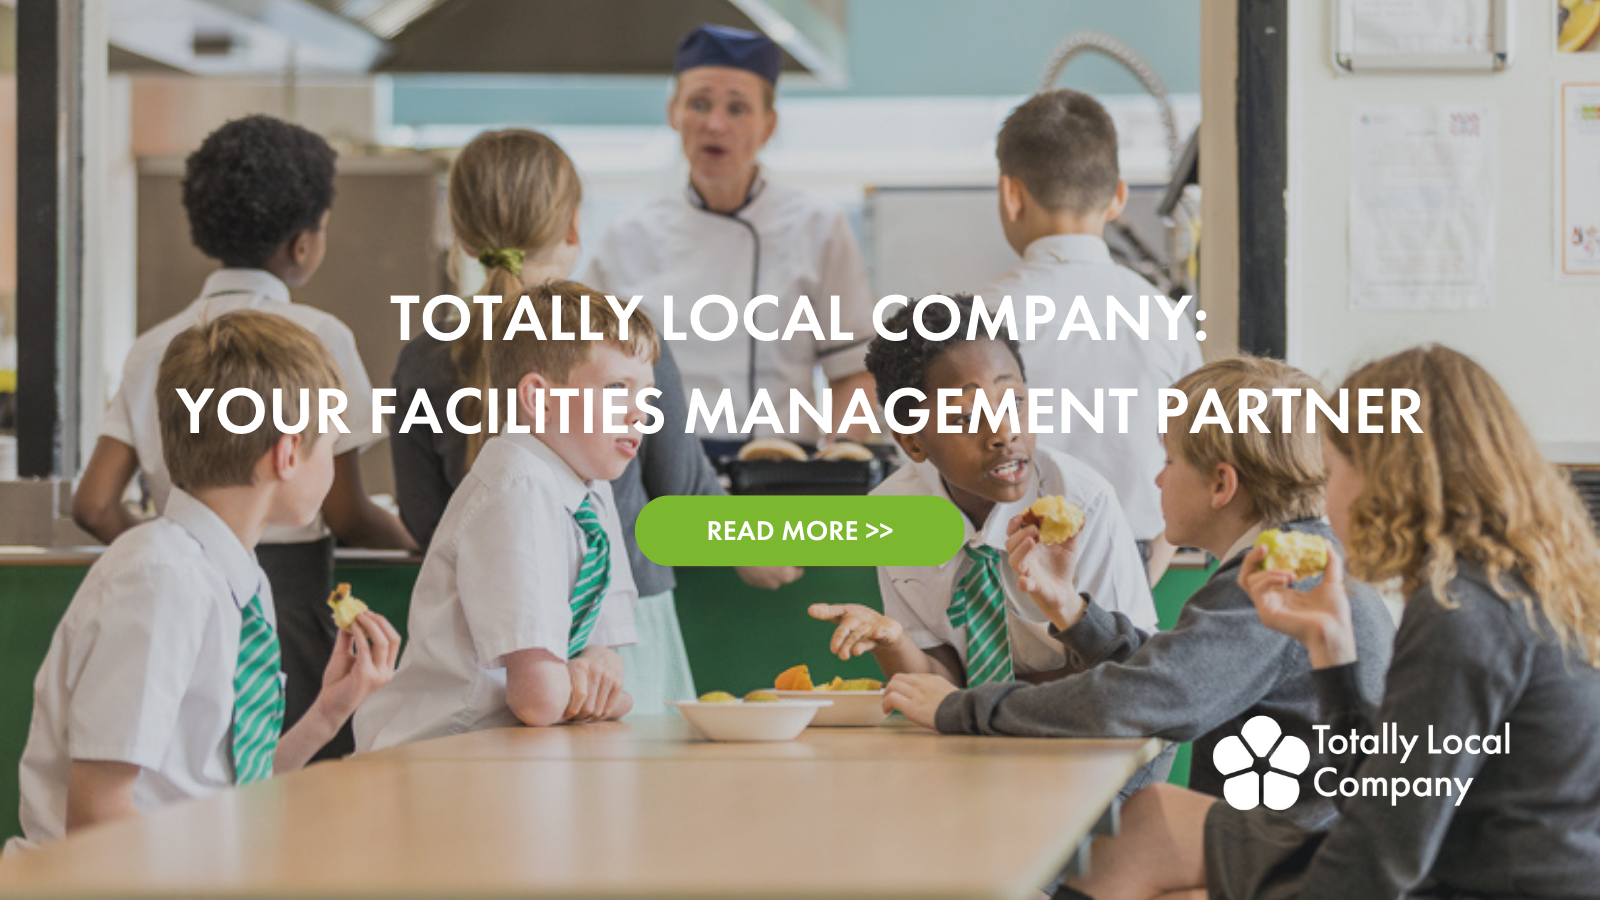 Totally Local Company: Your facilities management partner